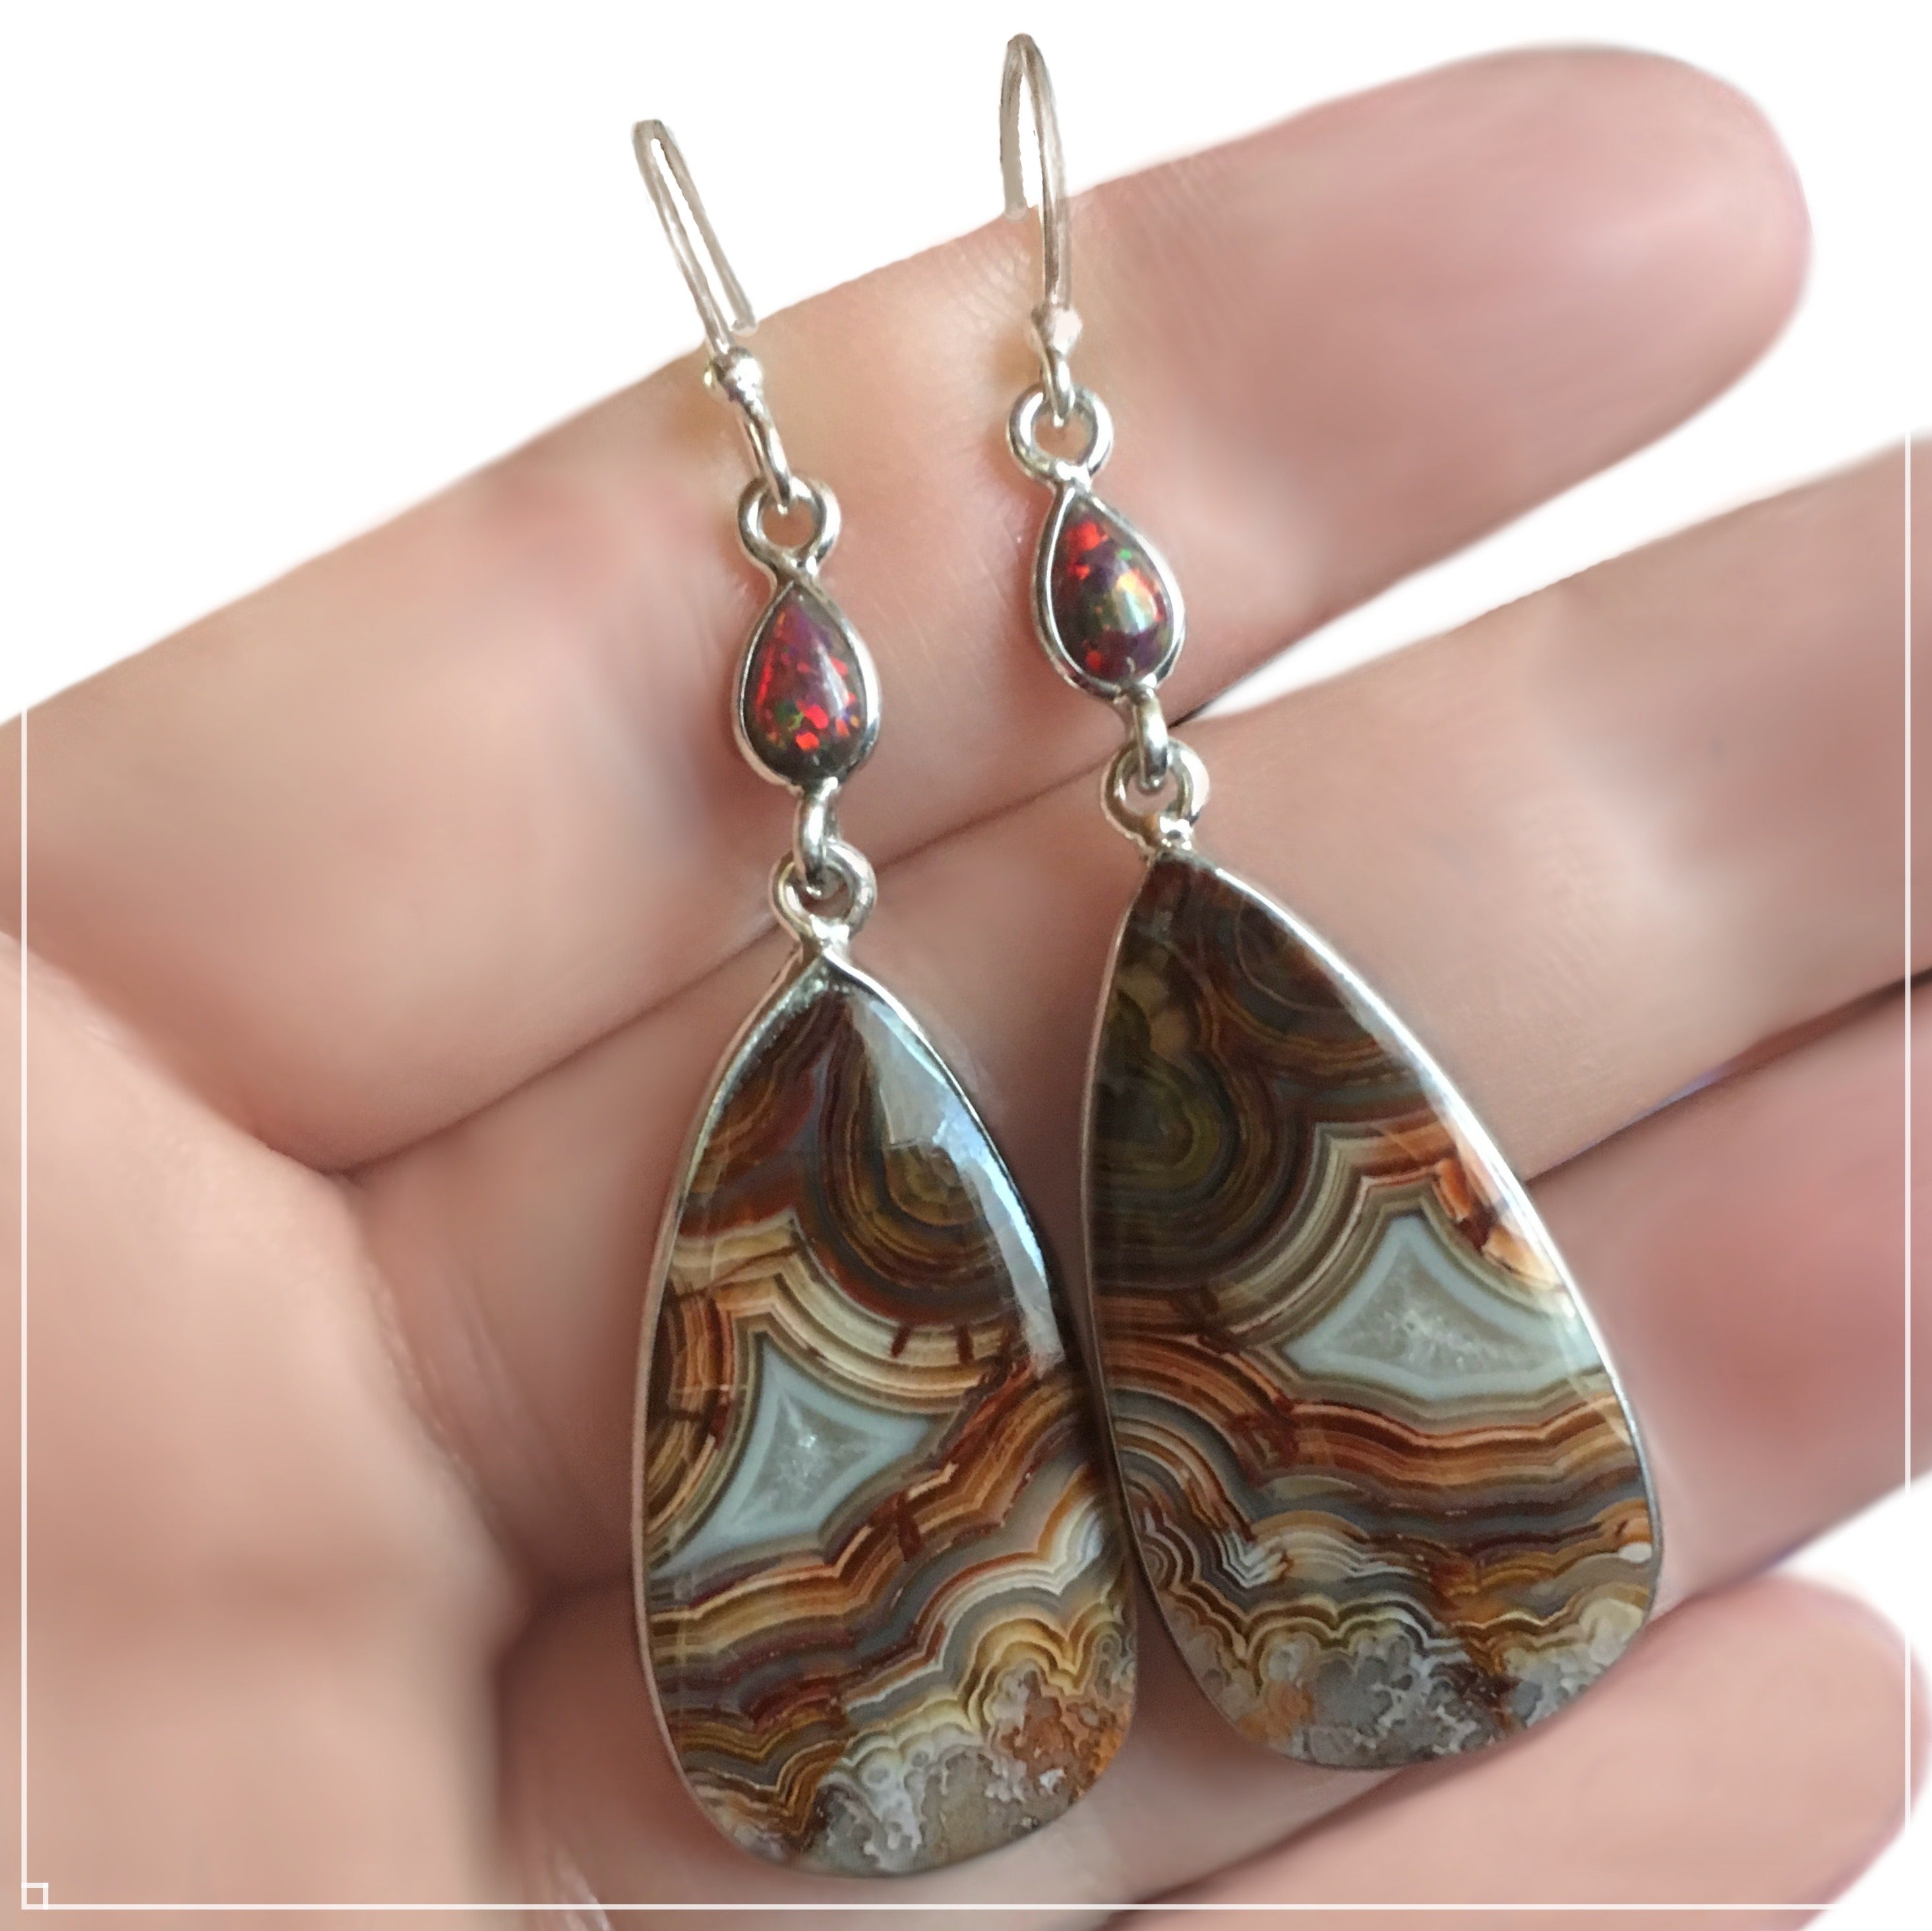 Natural Mexican Laguna Lace Agate, Fire Opal Gemstone Solid .925 Sterling Silver Earrings - BELLADONNA